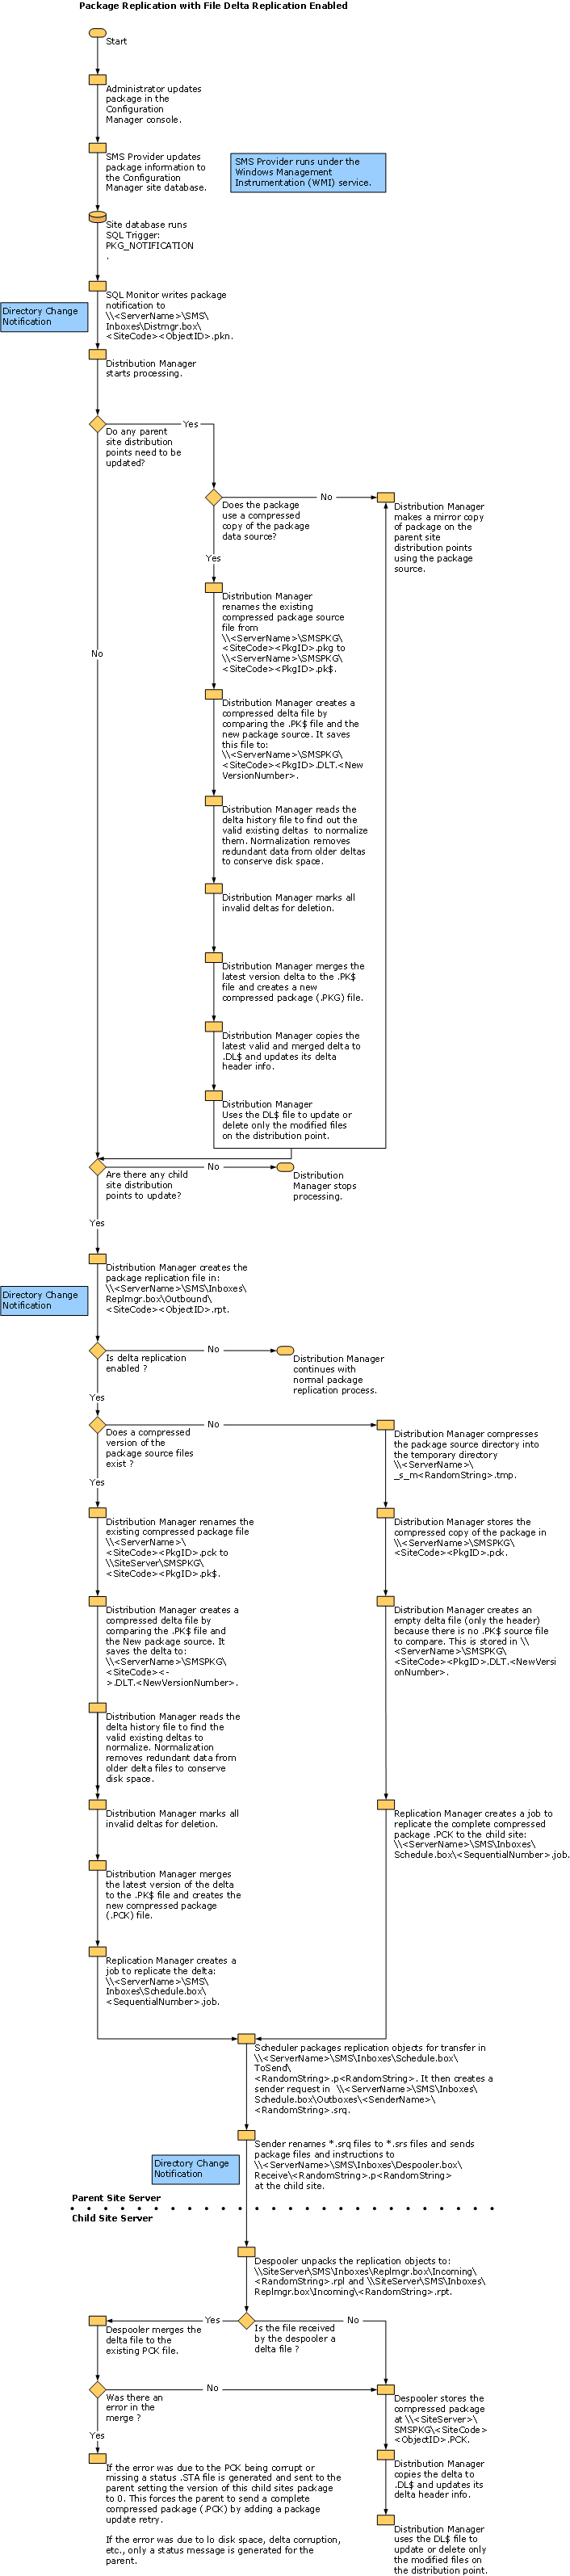 Flowchart Package Replication with file deltas